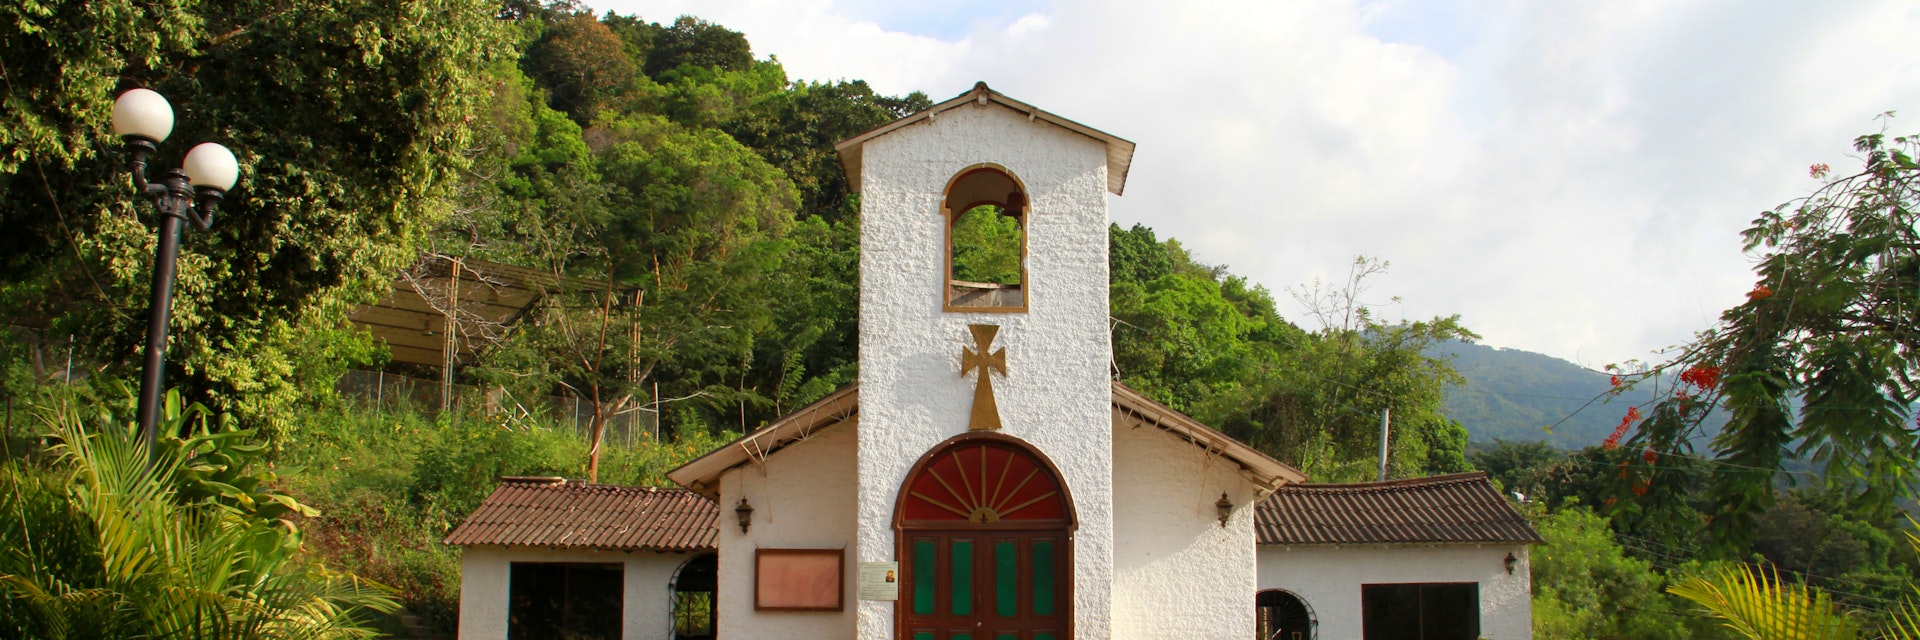 A peaceful, quiet, little and the unique church of a far away town in Colombia named Minca.